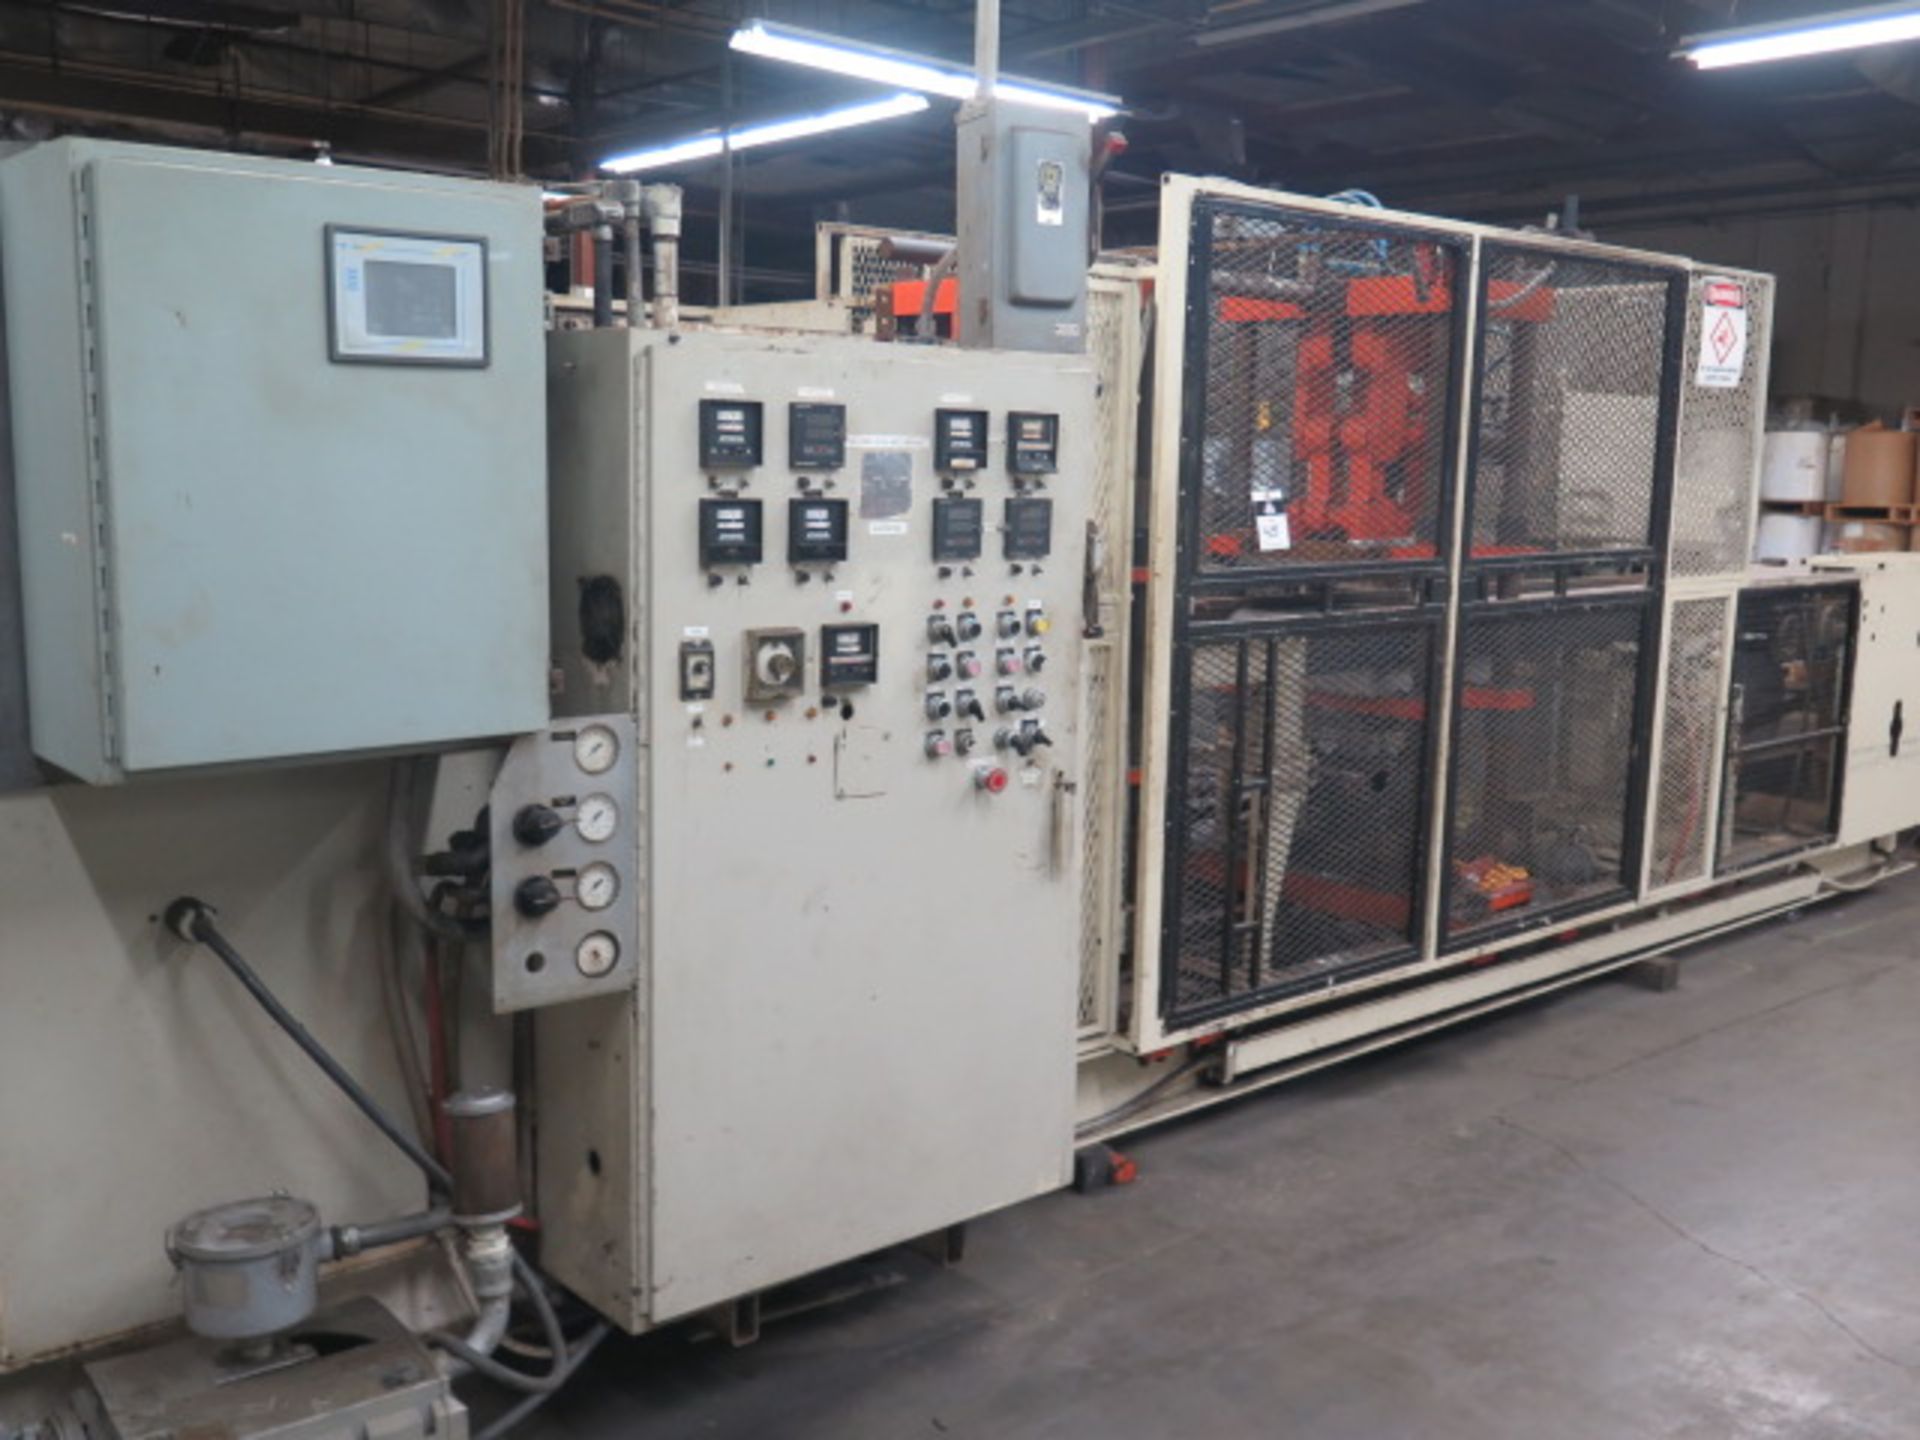 Sencorp Systems Thermoforming w/ Sencorp Controls, Film Preheater, 10” x 30” Vacuum, SOLD AS IS